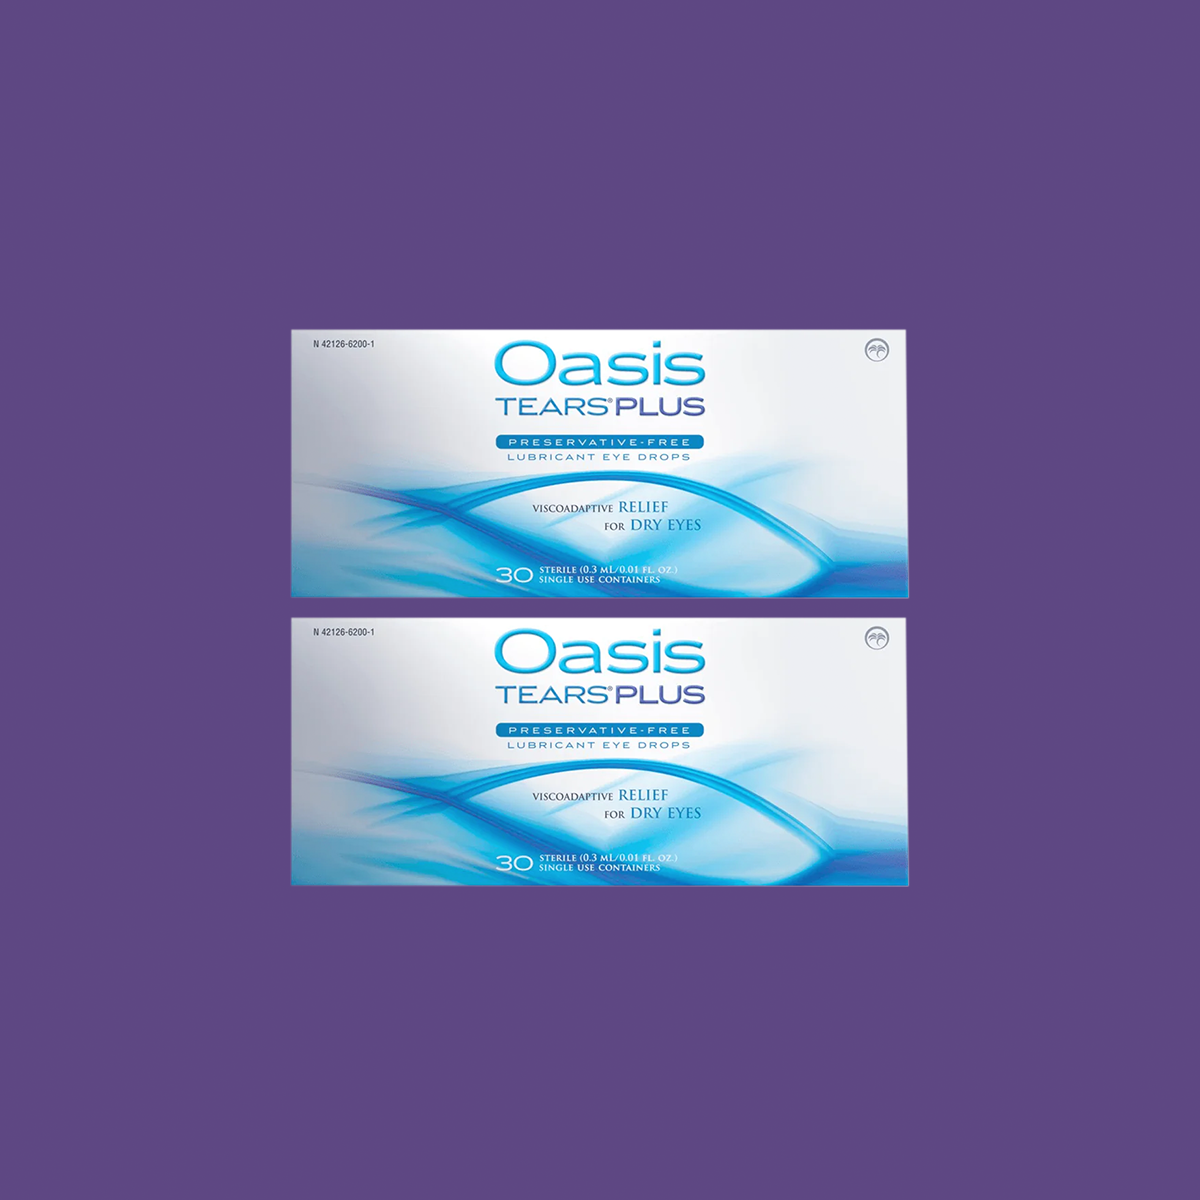 Oasis TEARS Plus Lubricant Eye Drops Relief for Dry Eyes, 30 Count Box Sterile Disposable Containers (Pack of 2)